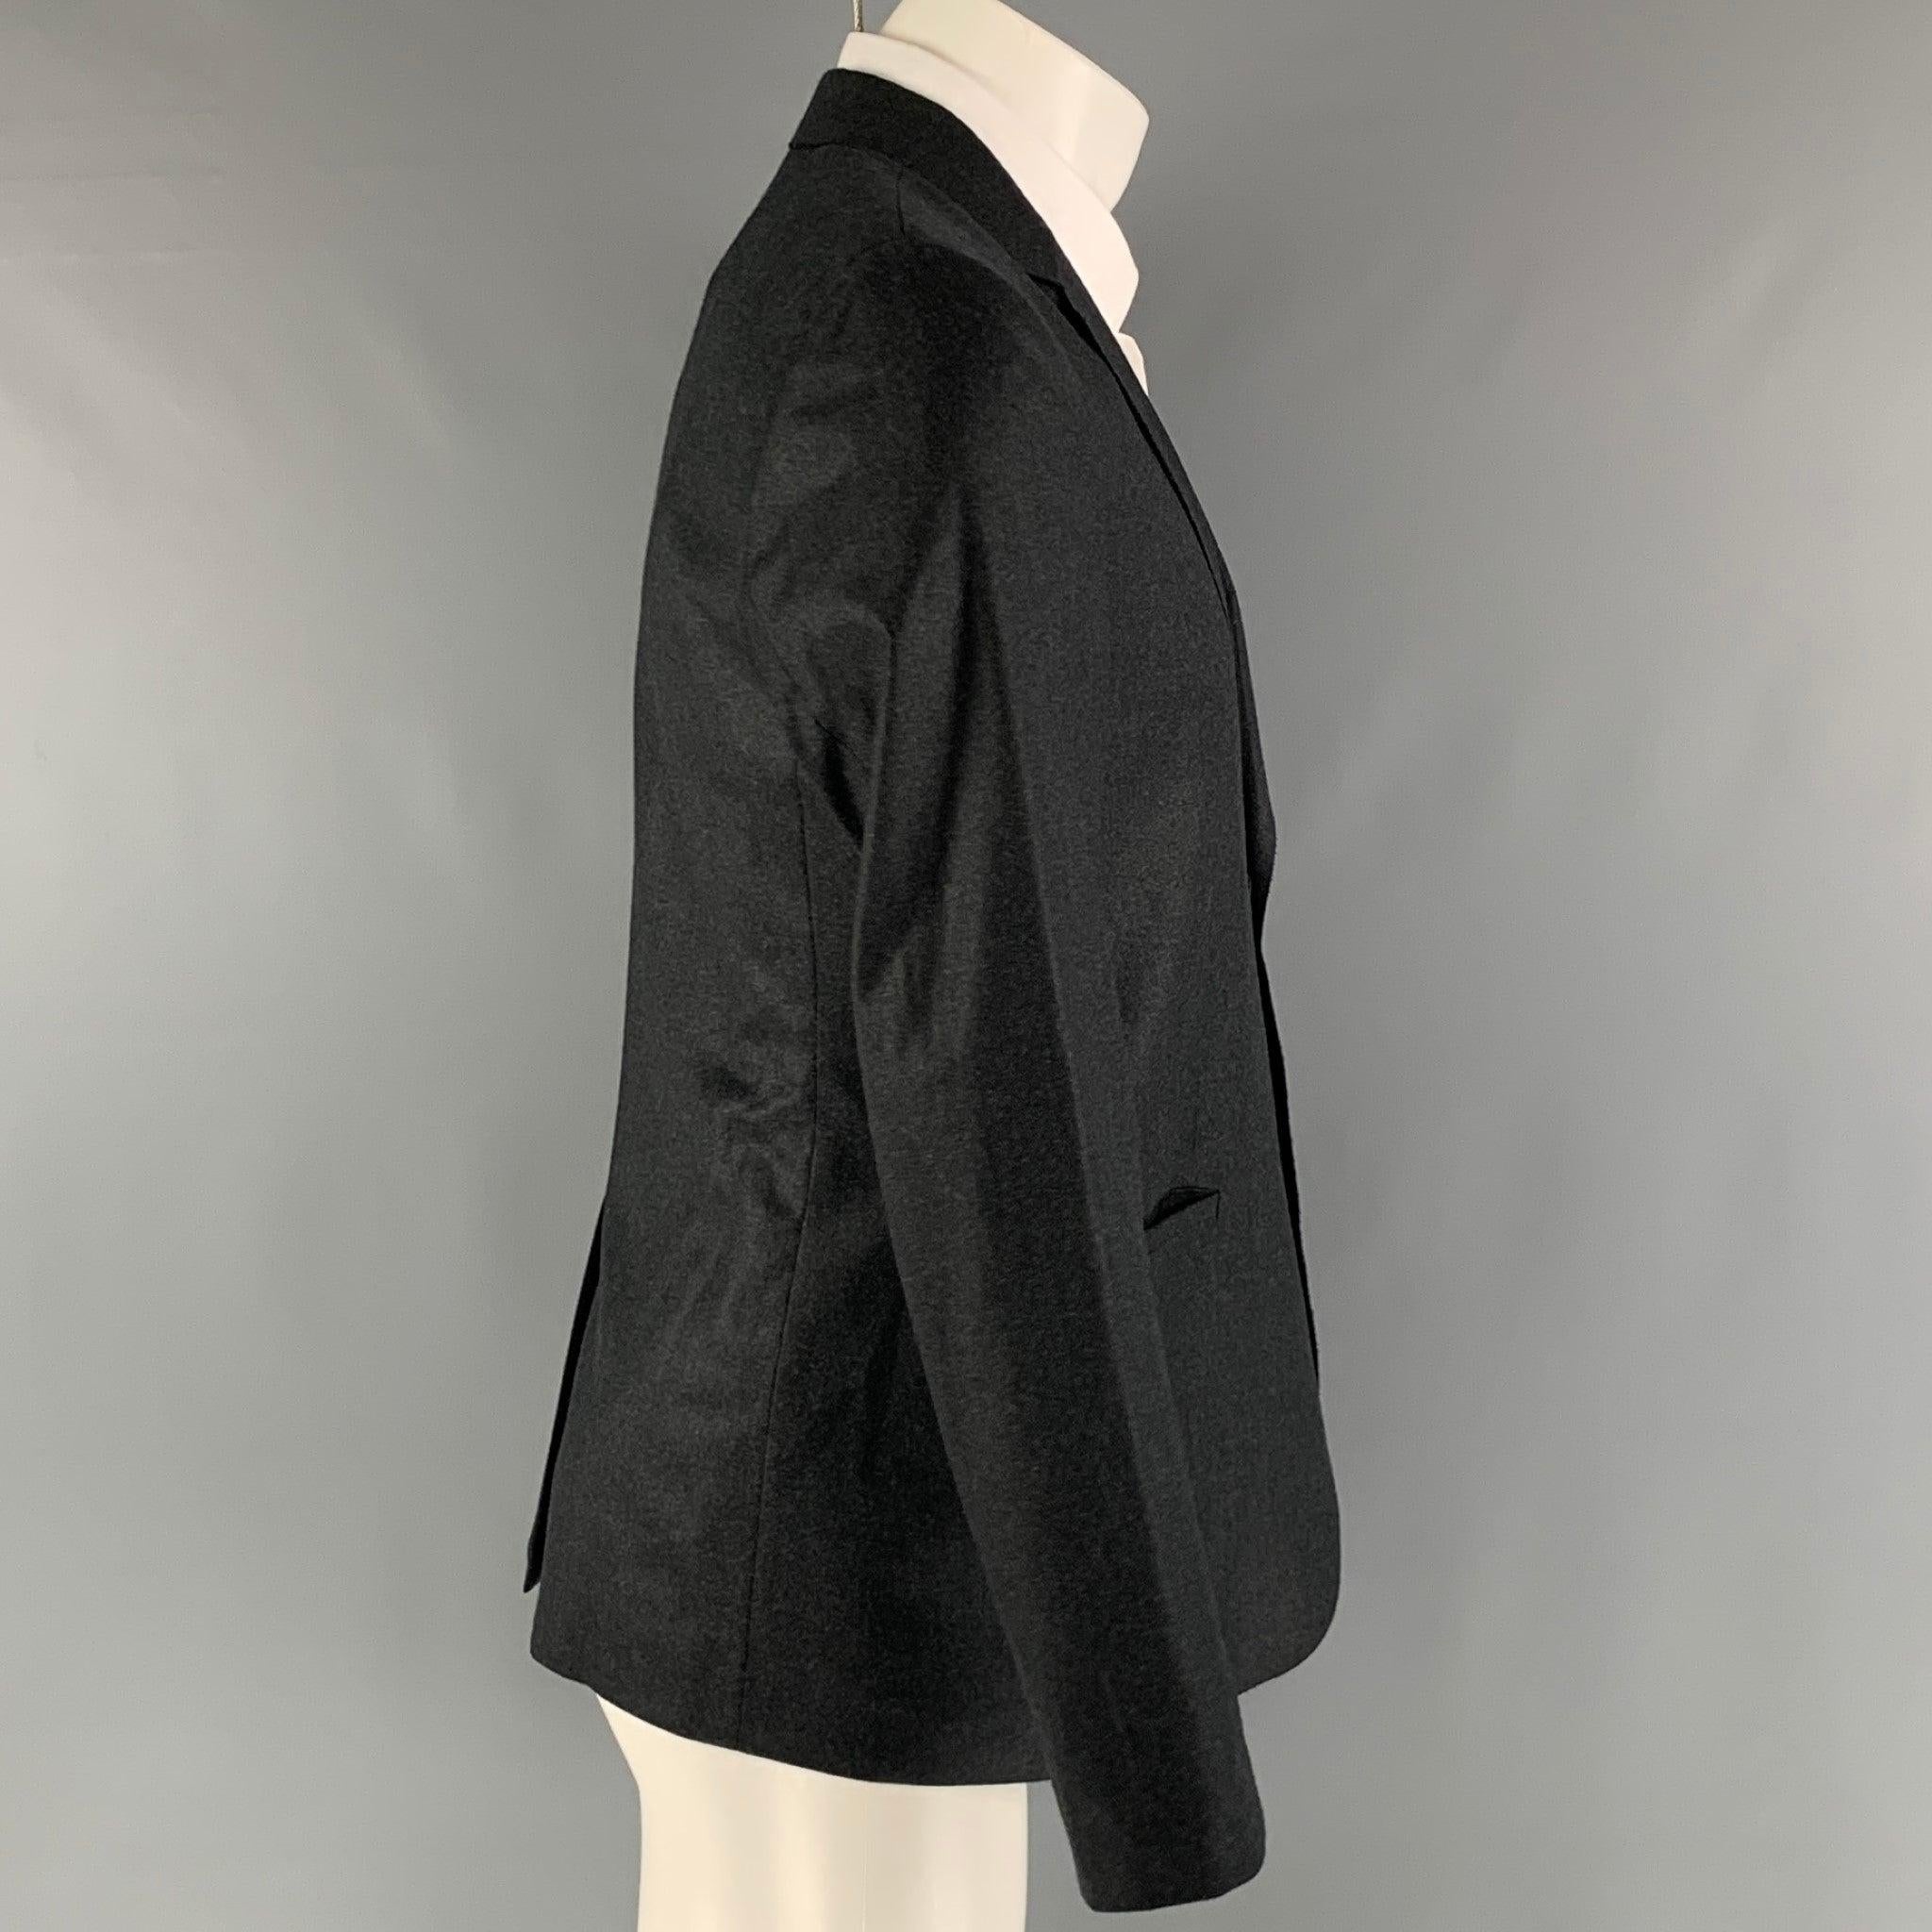 EMPORIO ARMANI 'MILANO' sport coat comes in a charcoal wool woven material with a full liner featuring a notch lapel, welt pockets, and a two snap button closure. Made in Italy. Excellent Pre-Owned Condition. 

Marked:   48 

Measurements: 
